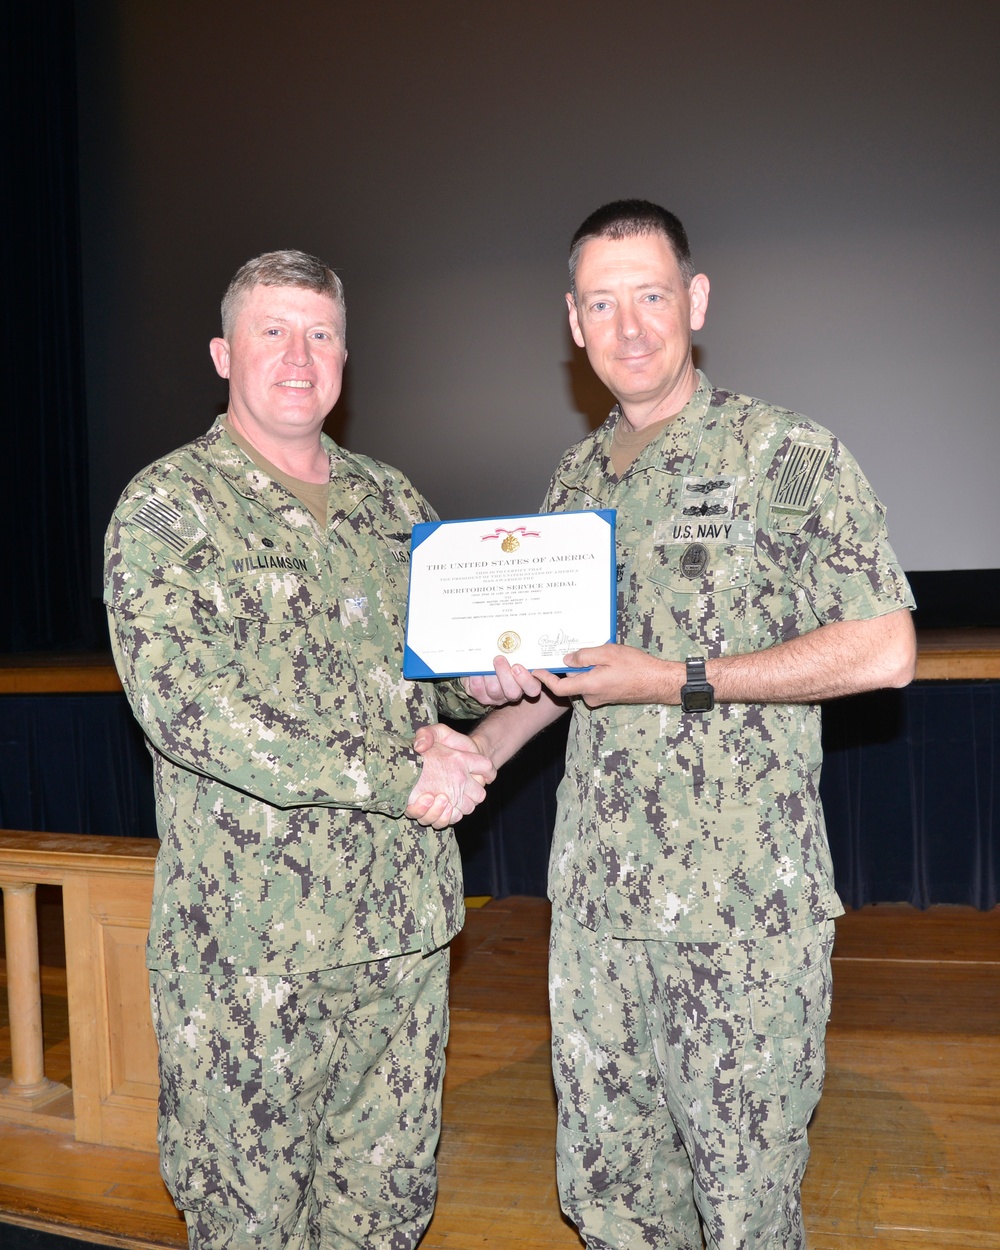 Command Master Chief receives Meritorious Service Medal